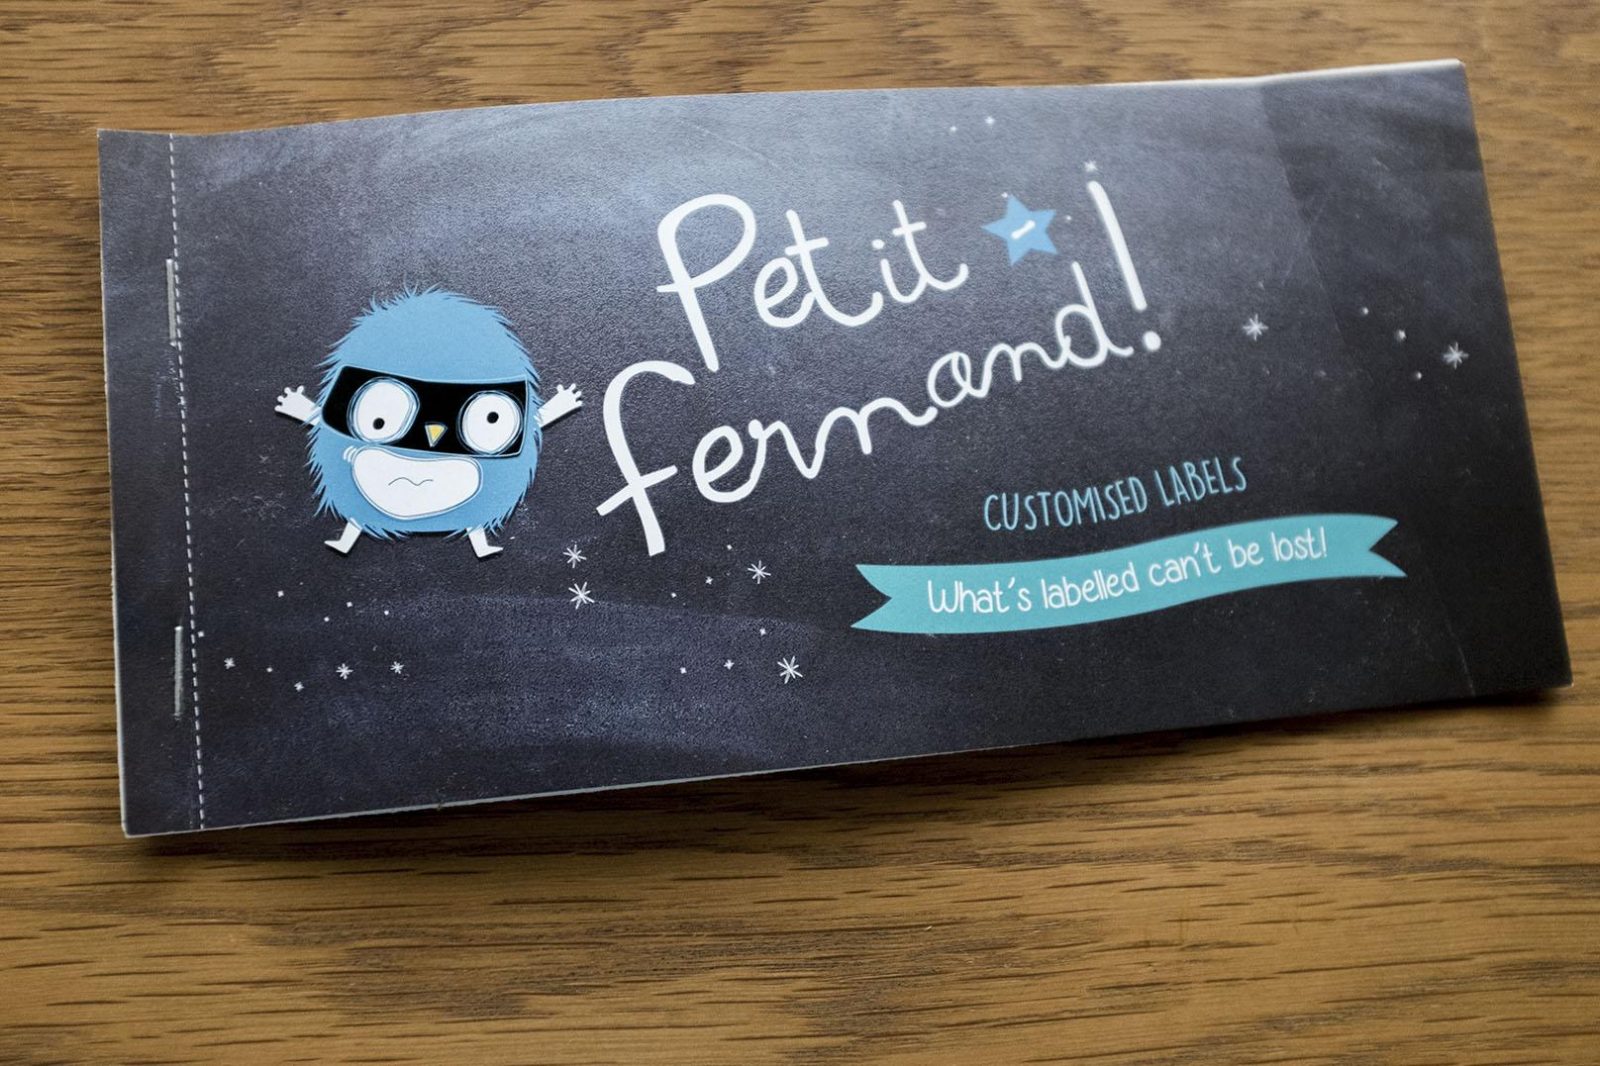 REVIEW – Petit-Fernand Labels and Personalised Products